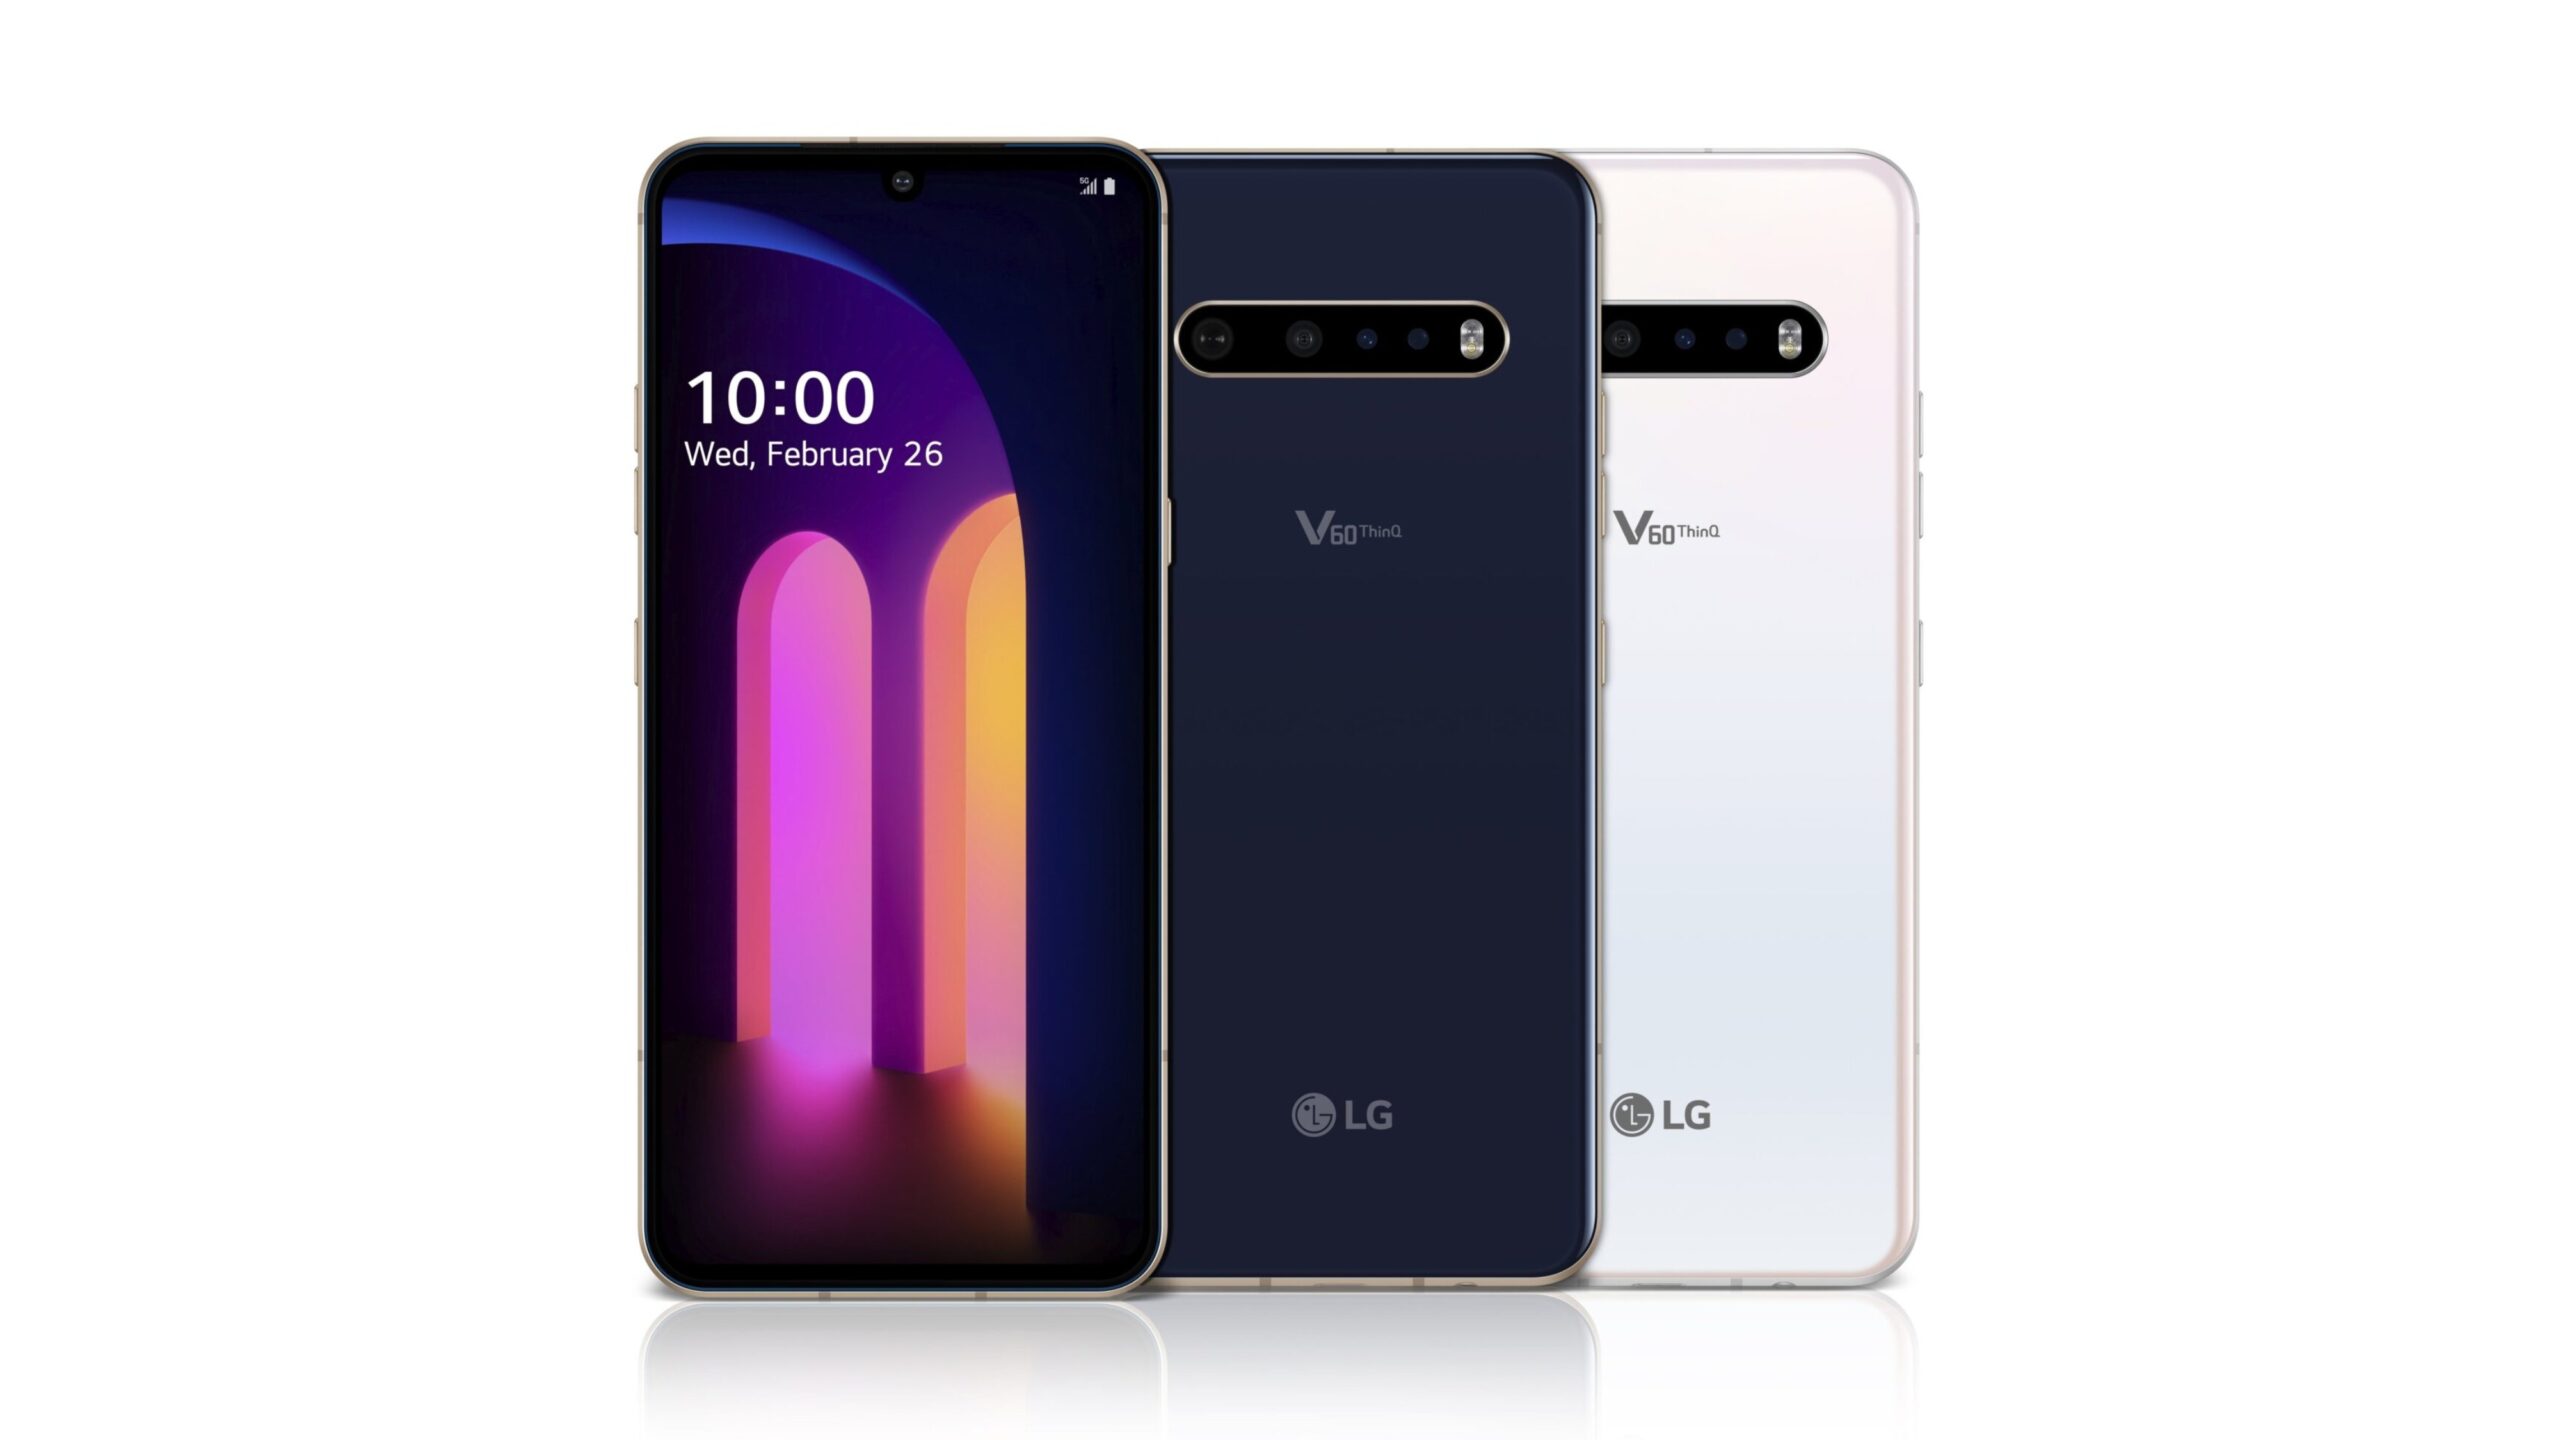 LG V60 ThinQ 5G is finally receiving the Android 11 update